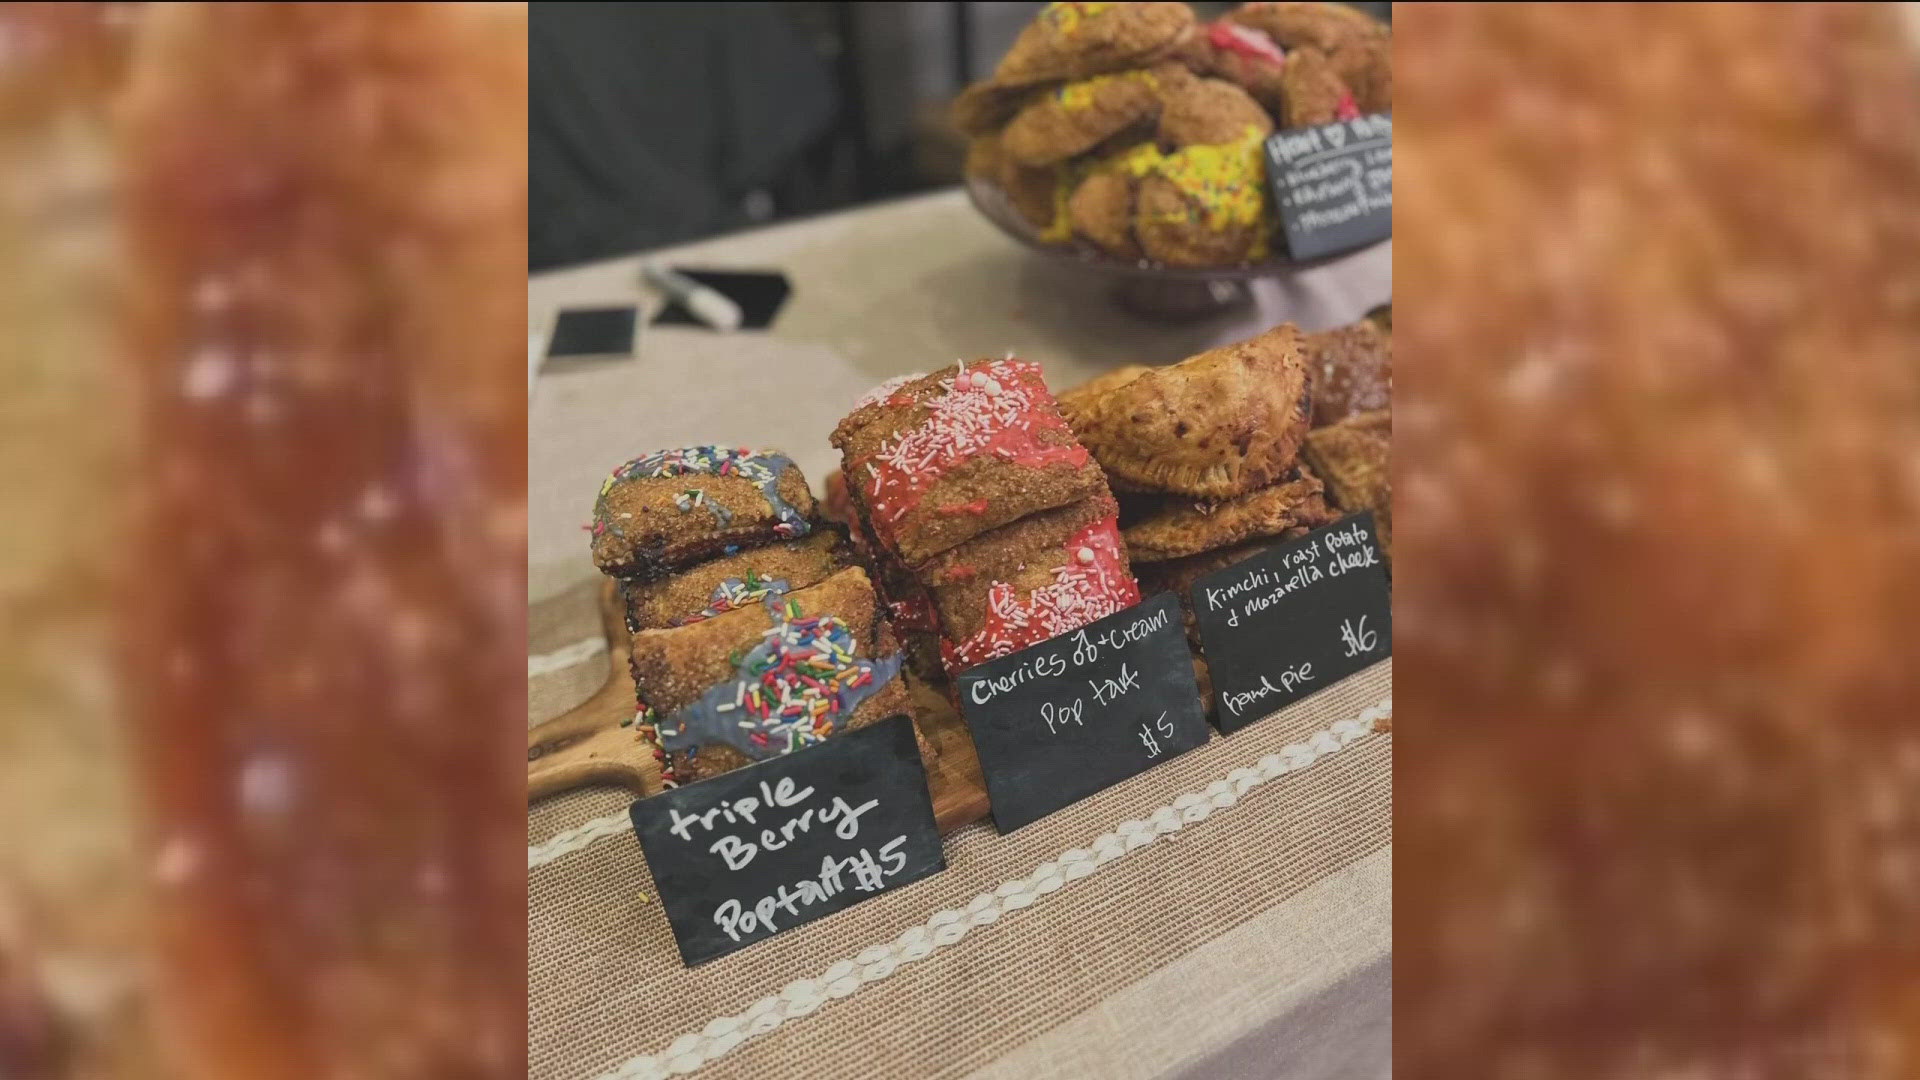 Head baker and owner of Fruit & Grain Bakery, Emily Lauer, joined KARE 11 Saturday to demonstrate.